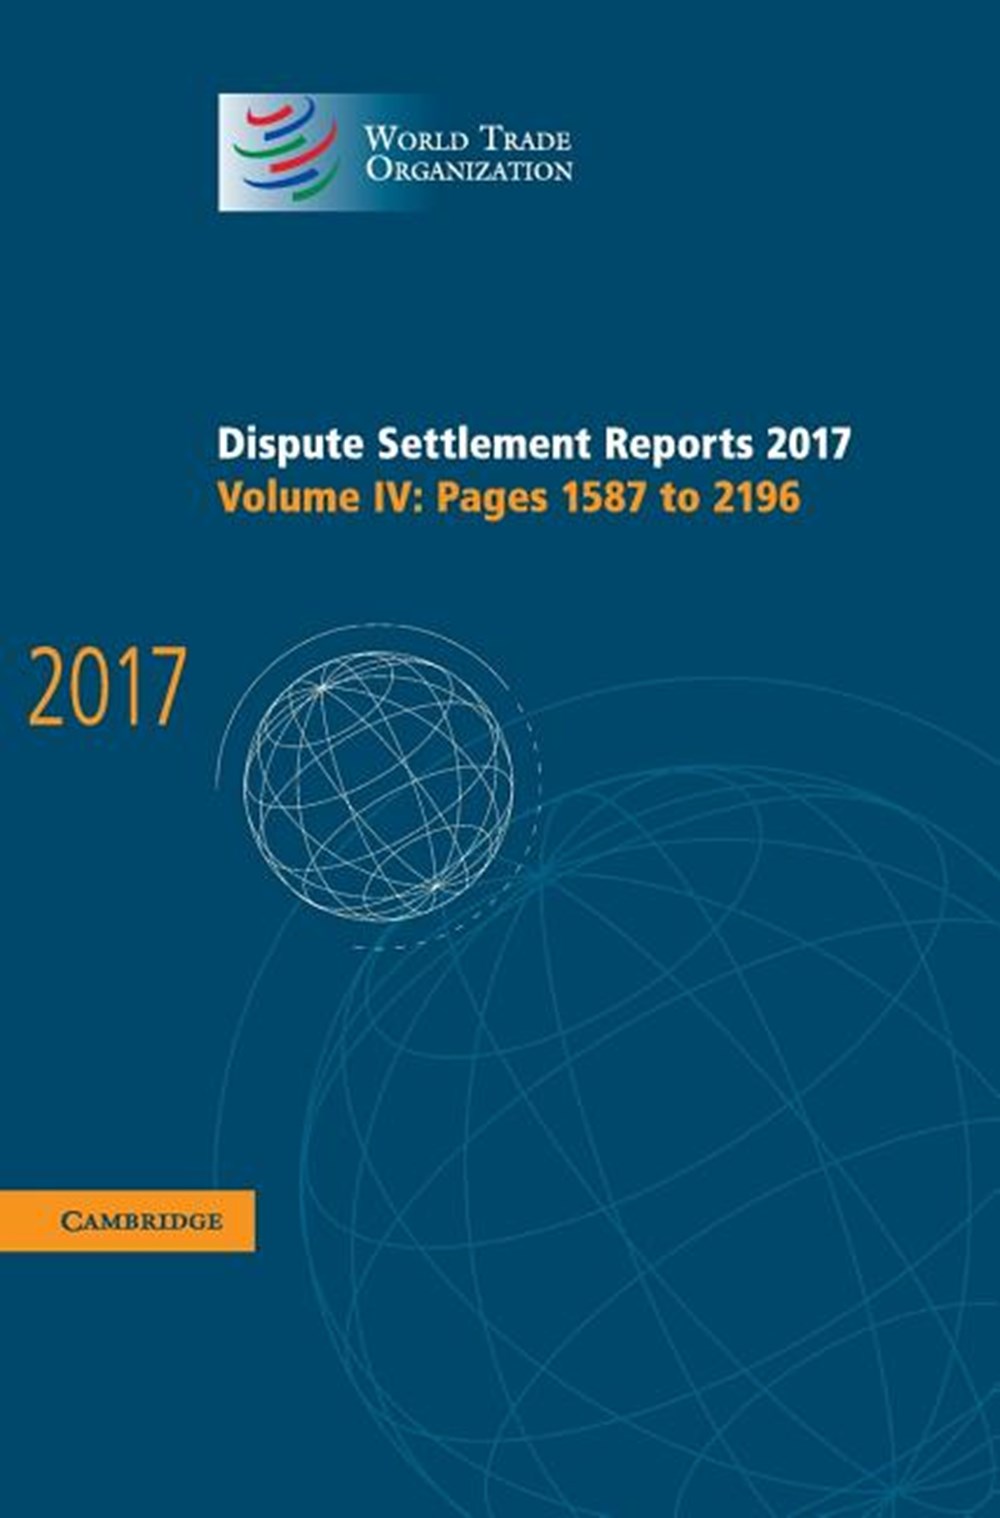 Dispute Settlement Reports 2017: Volume 4, Pages 1587 to 2196